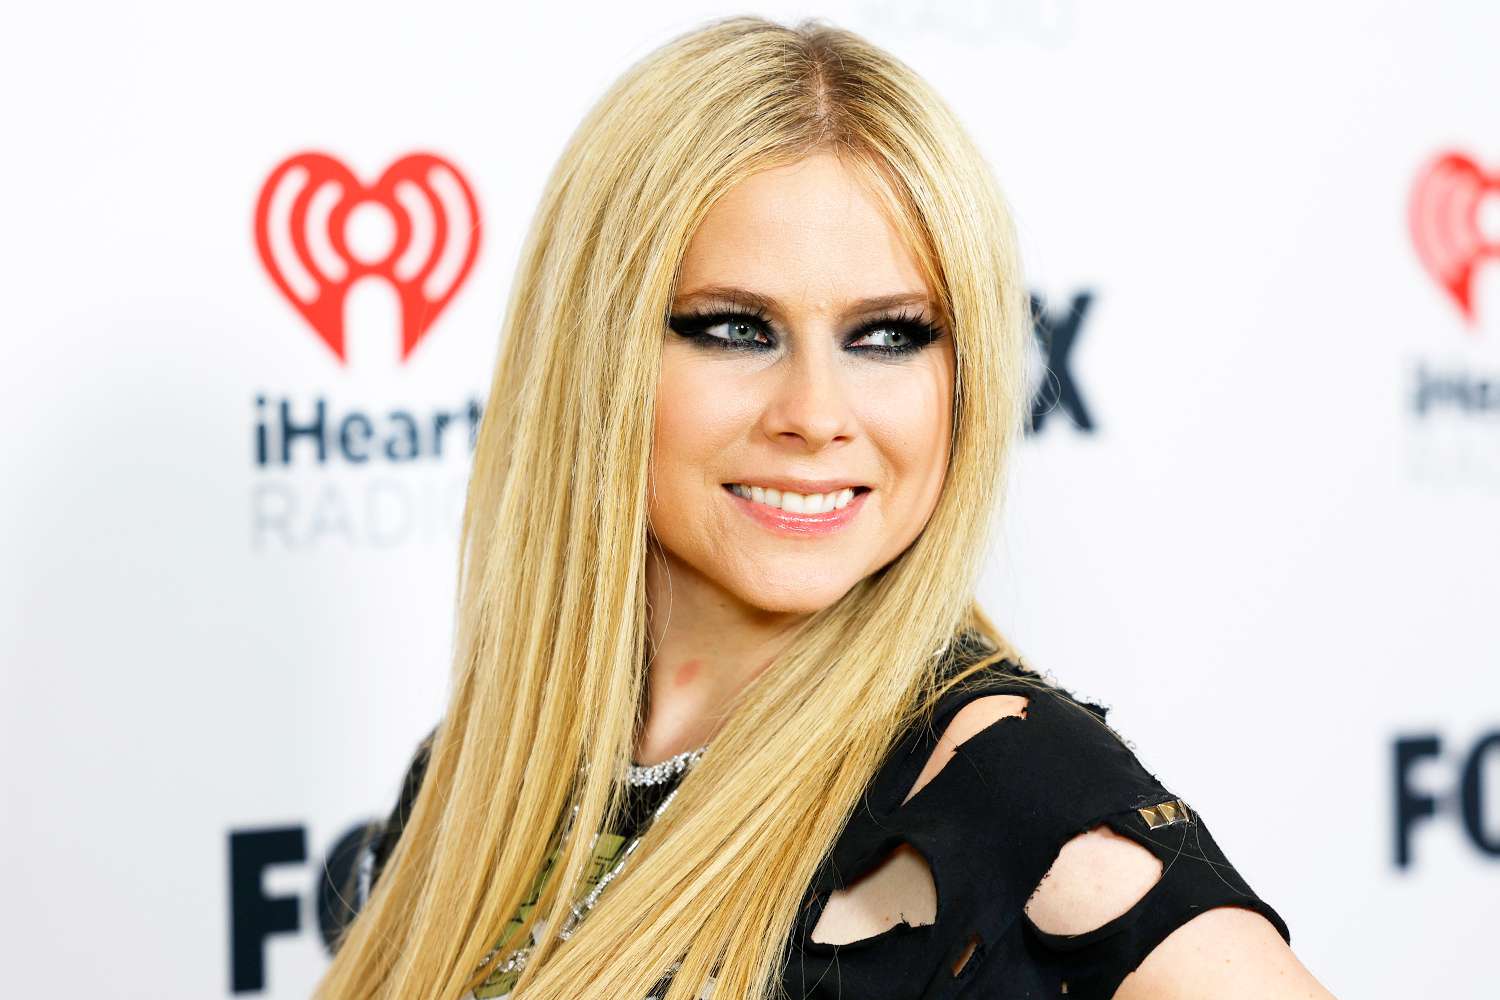 Avril Lavigne Says She's 'F---ing Awesome' in a Relationship: 'I Would Date Me'